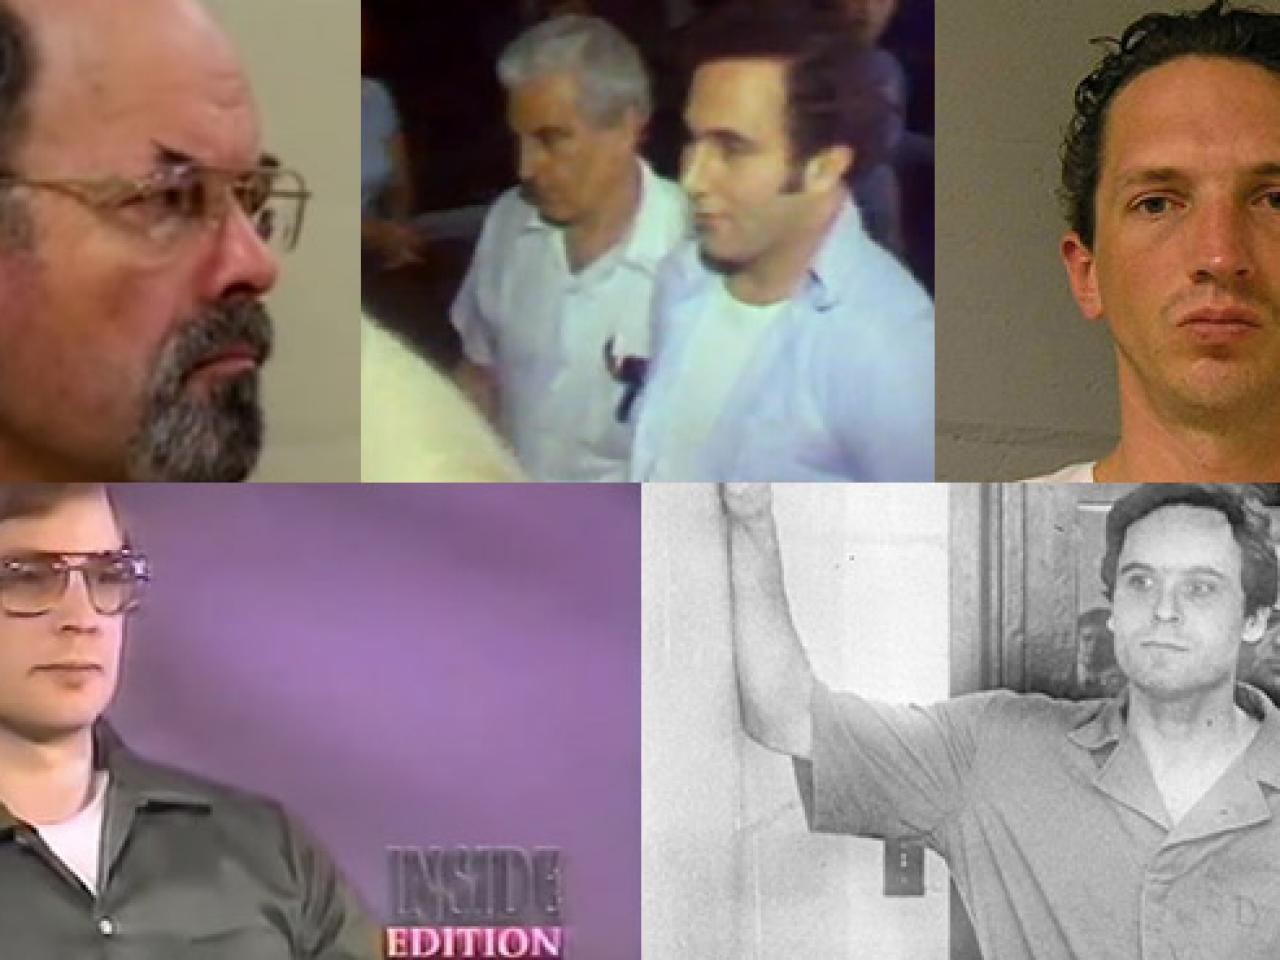 Infamous Serial Killers: Mass Murderers Who Terrorized Their Communities